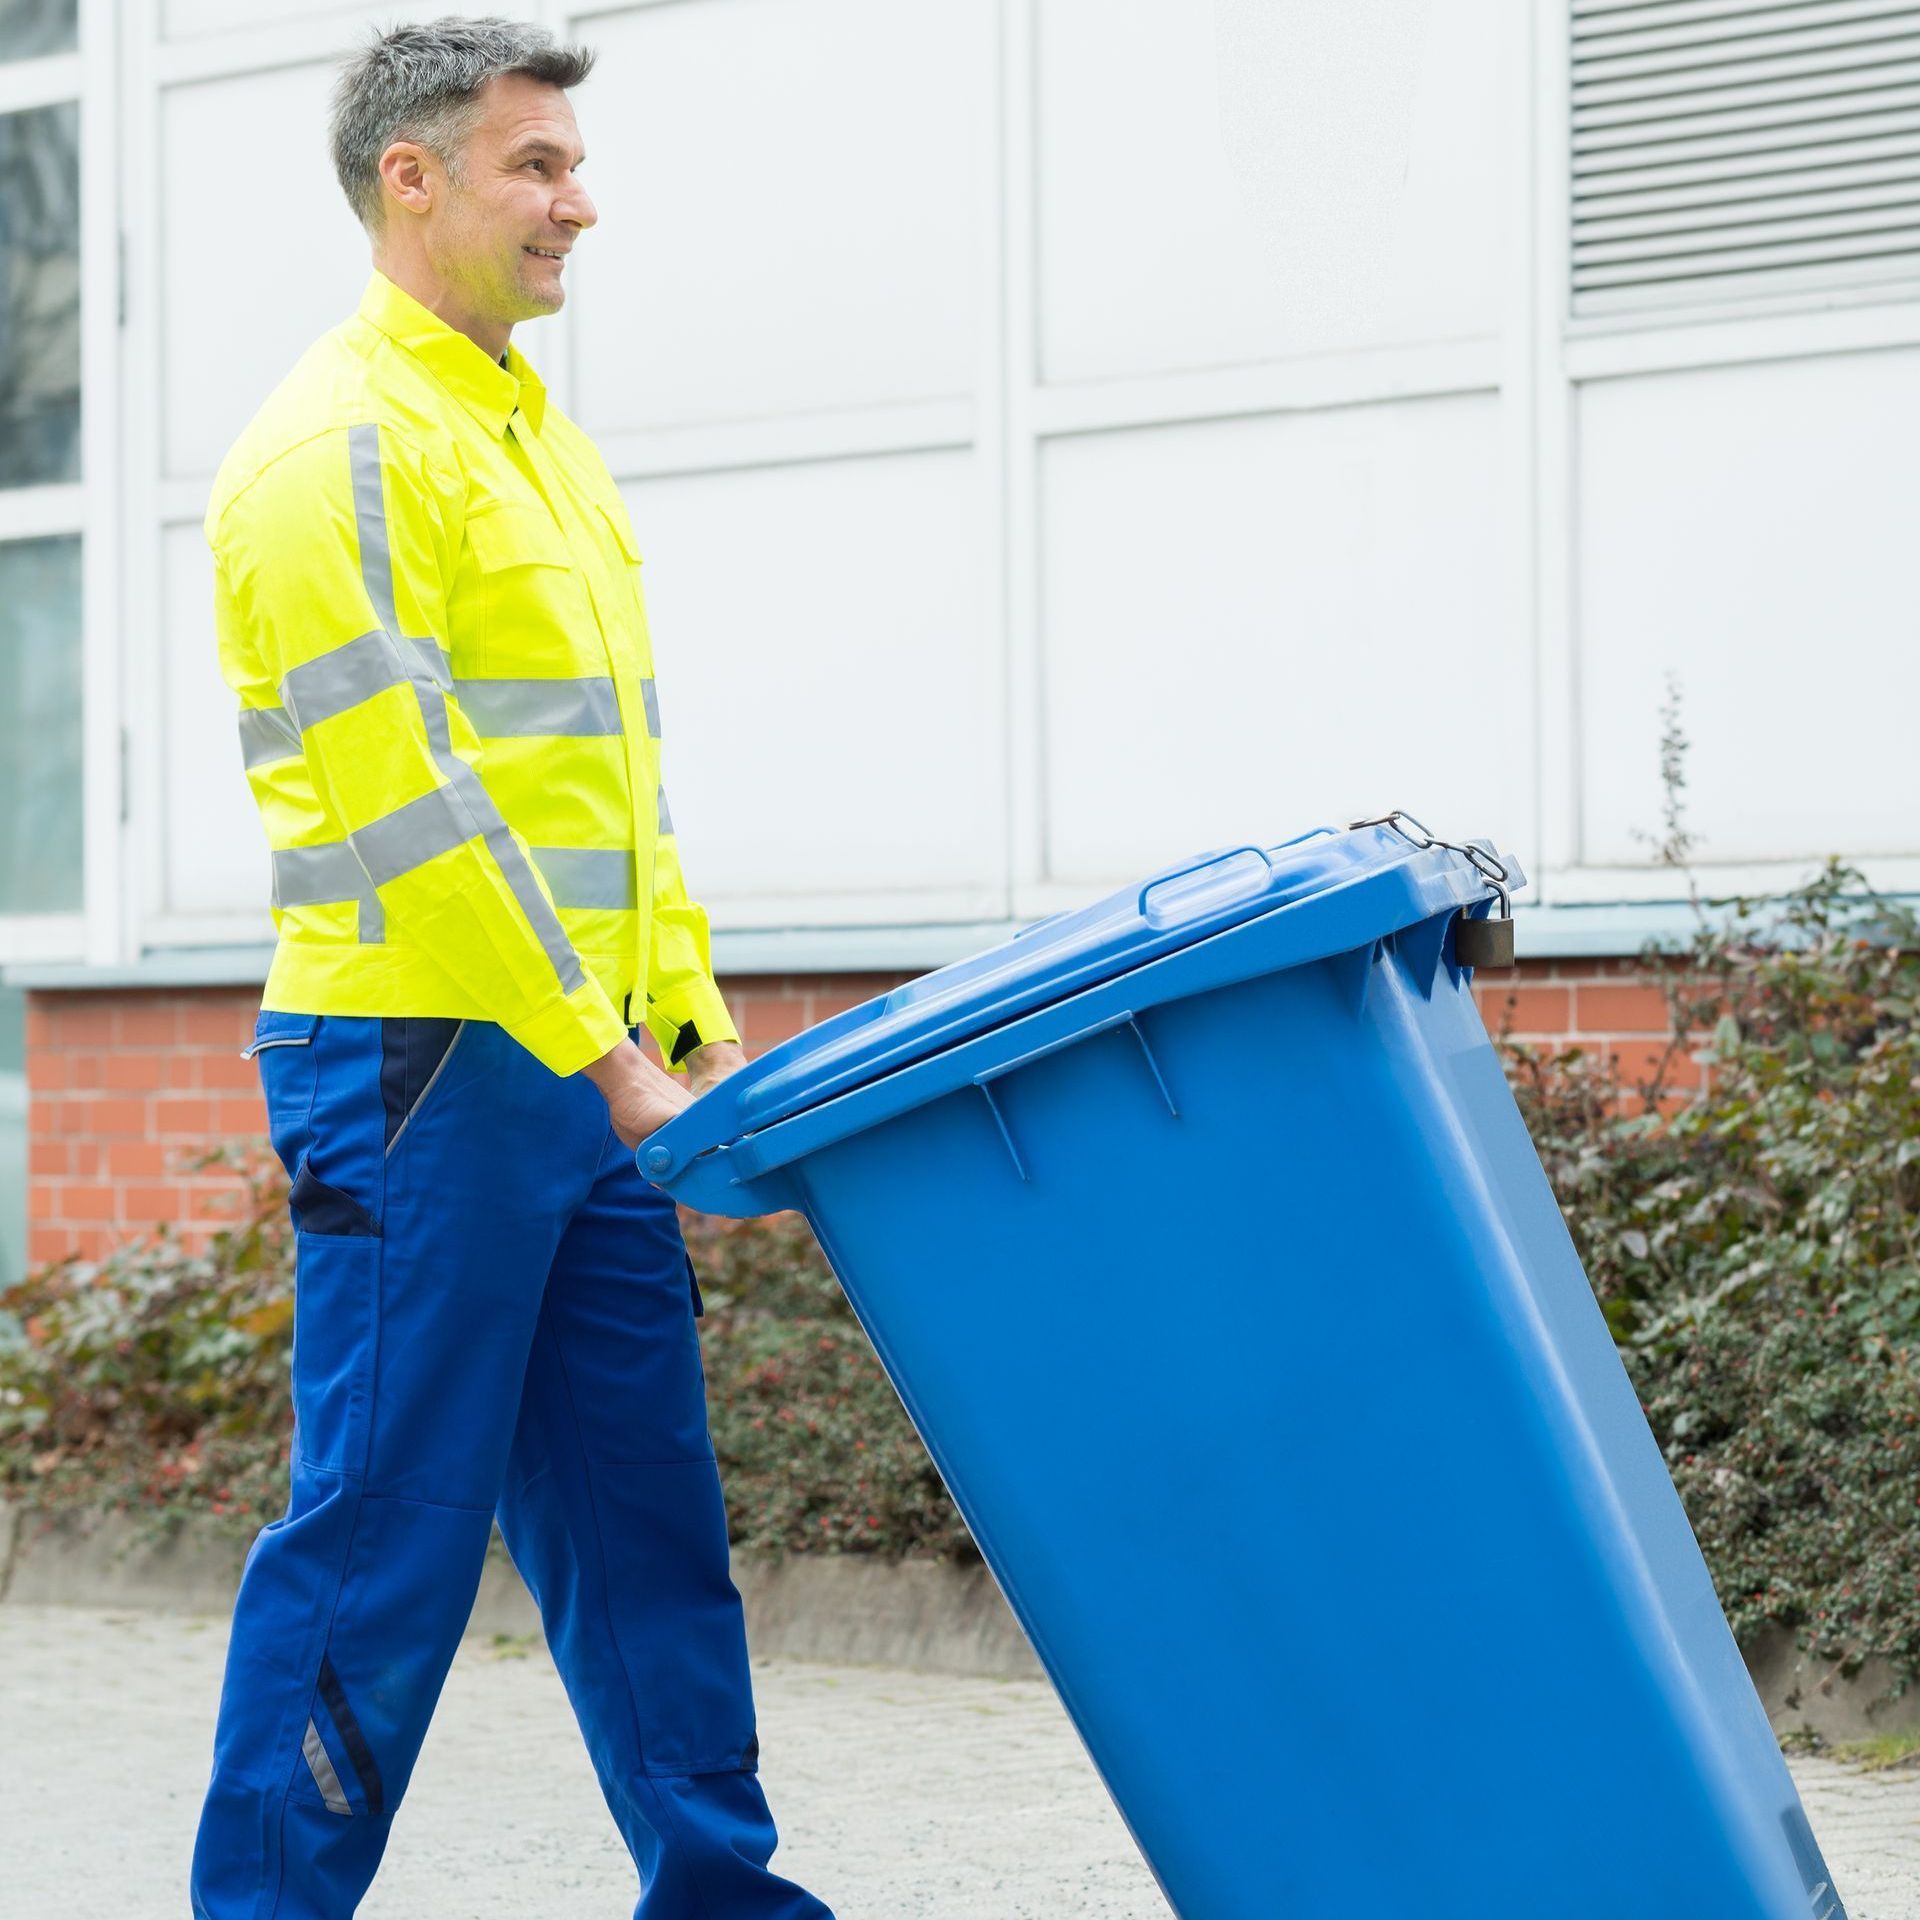 a man in a yellow jacket is pushing a blue trash can